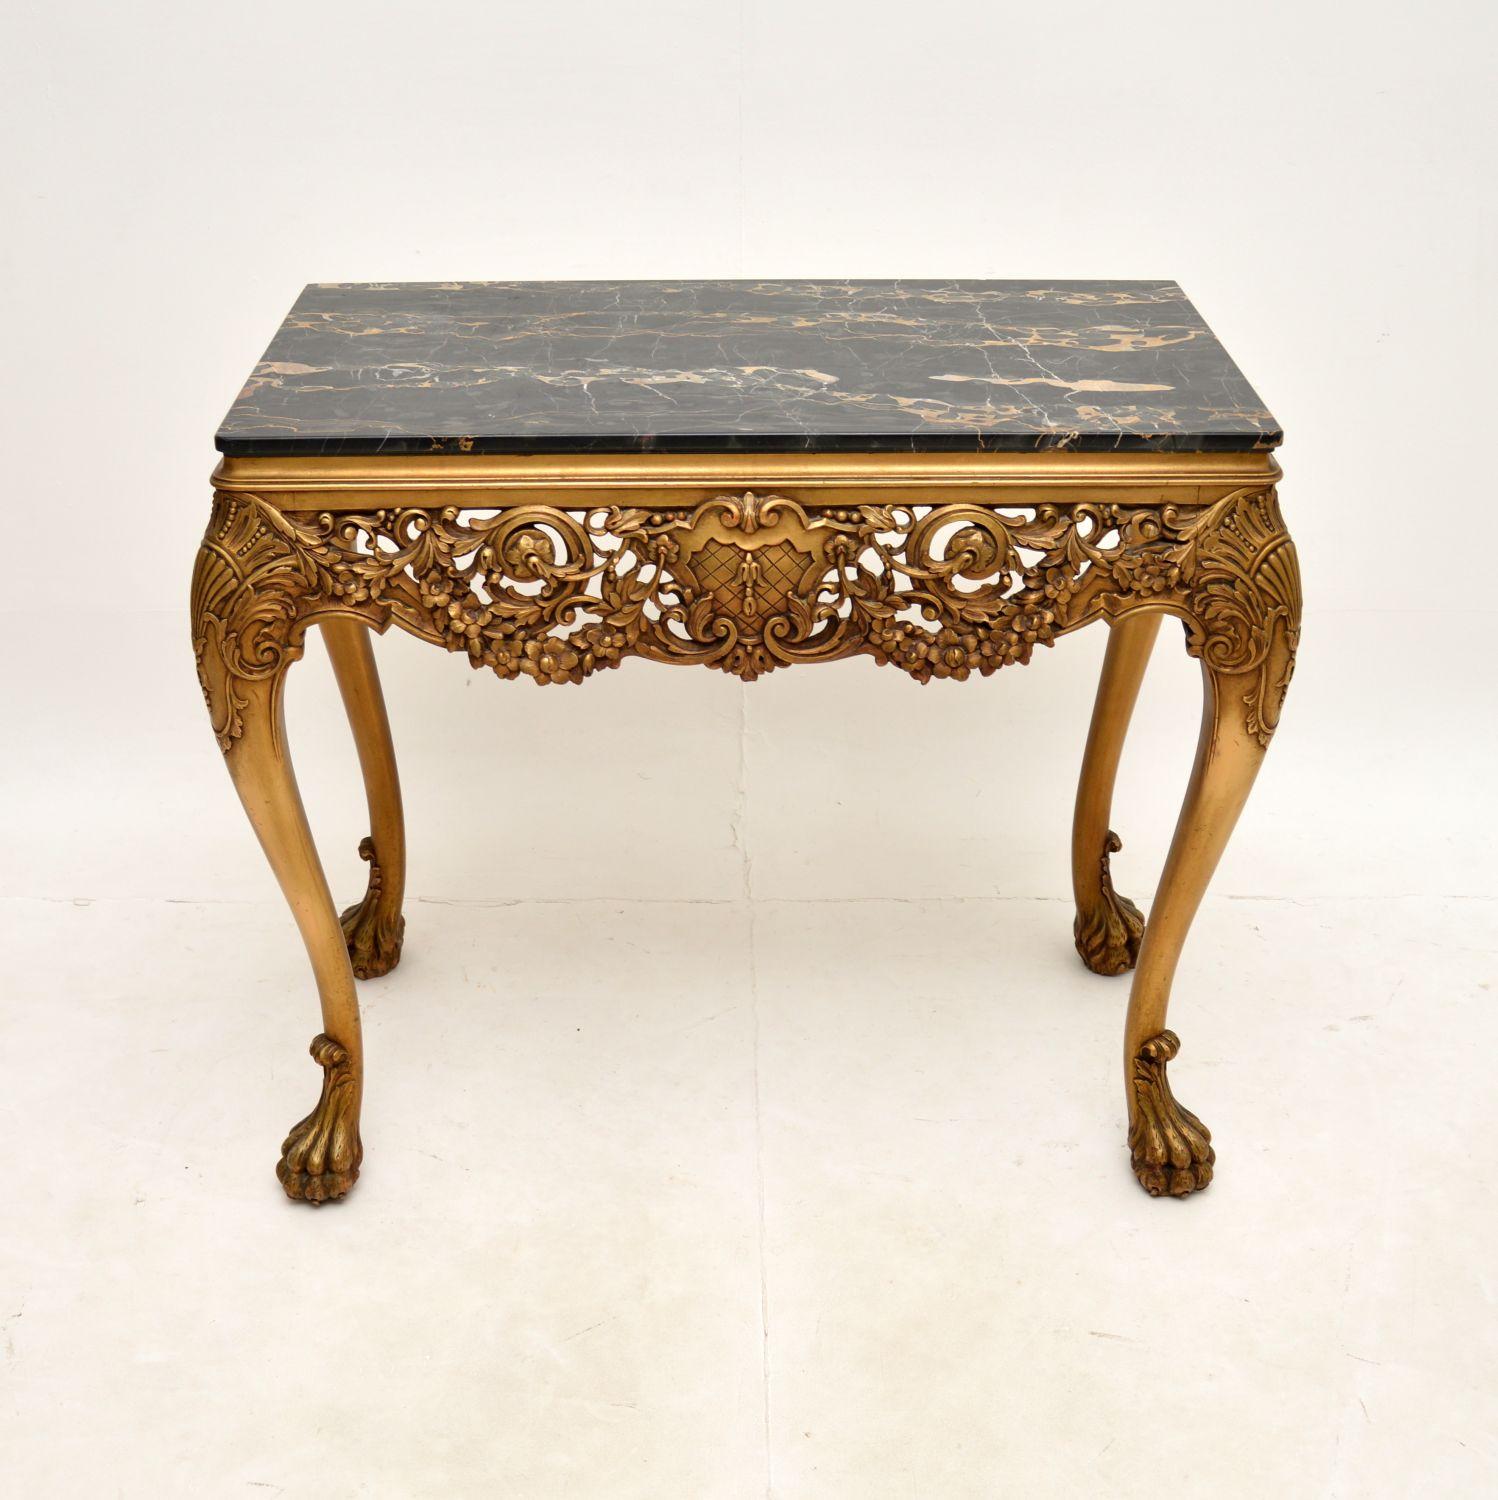 A stunning antique William Kent style marble top gilt wood side table. This was made in England, it dates from around the 1930’s.

The quality is outstanding, this has fine and intricate carving throughout the gilt wood frame. The frame has a lovely